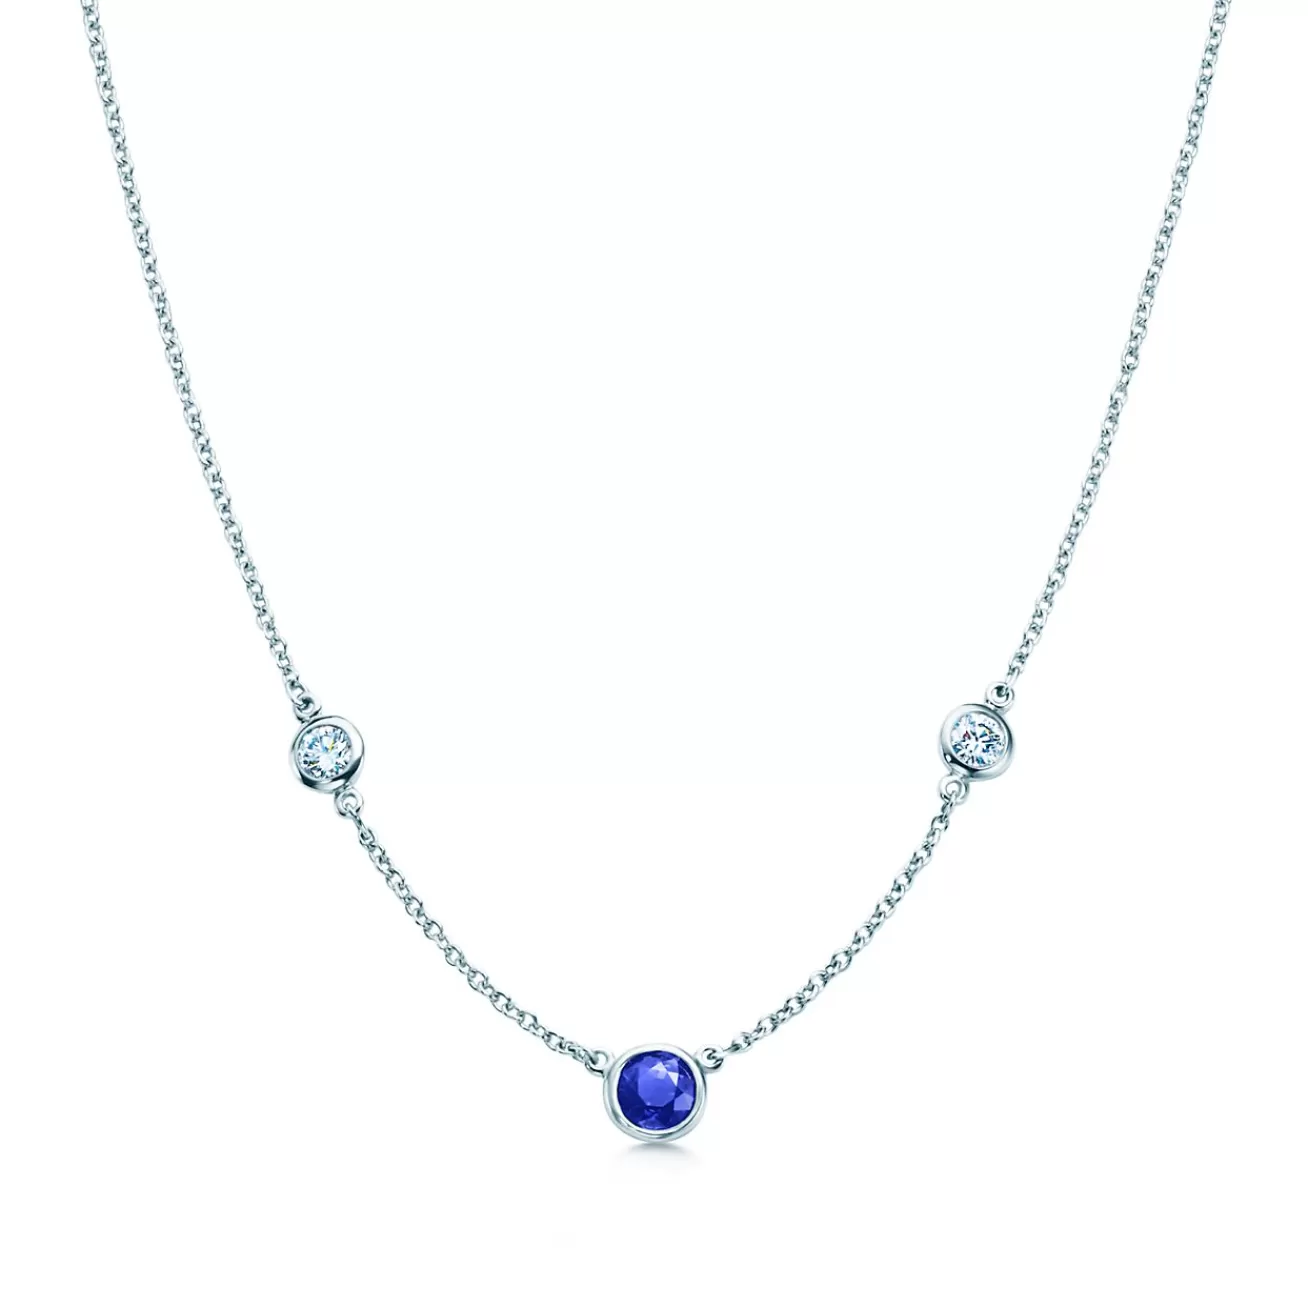 Tiffany & Co. Elsa Peretti® Color by the Yard necklace of diamonds and a sapphire in platinum. | ^ Necklaces & Pendants | Platinum Jewelry